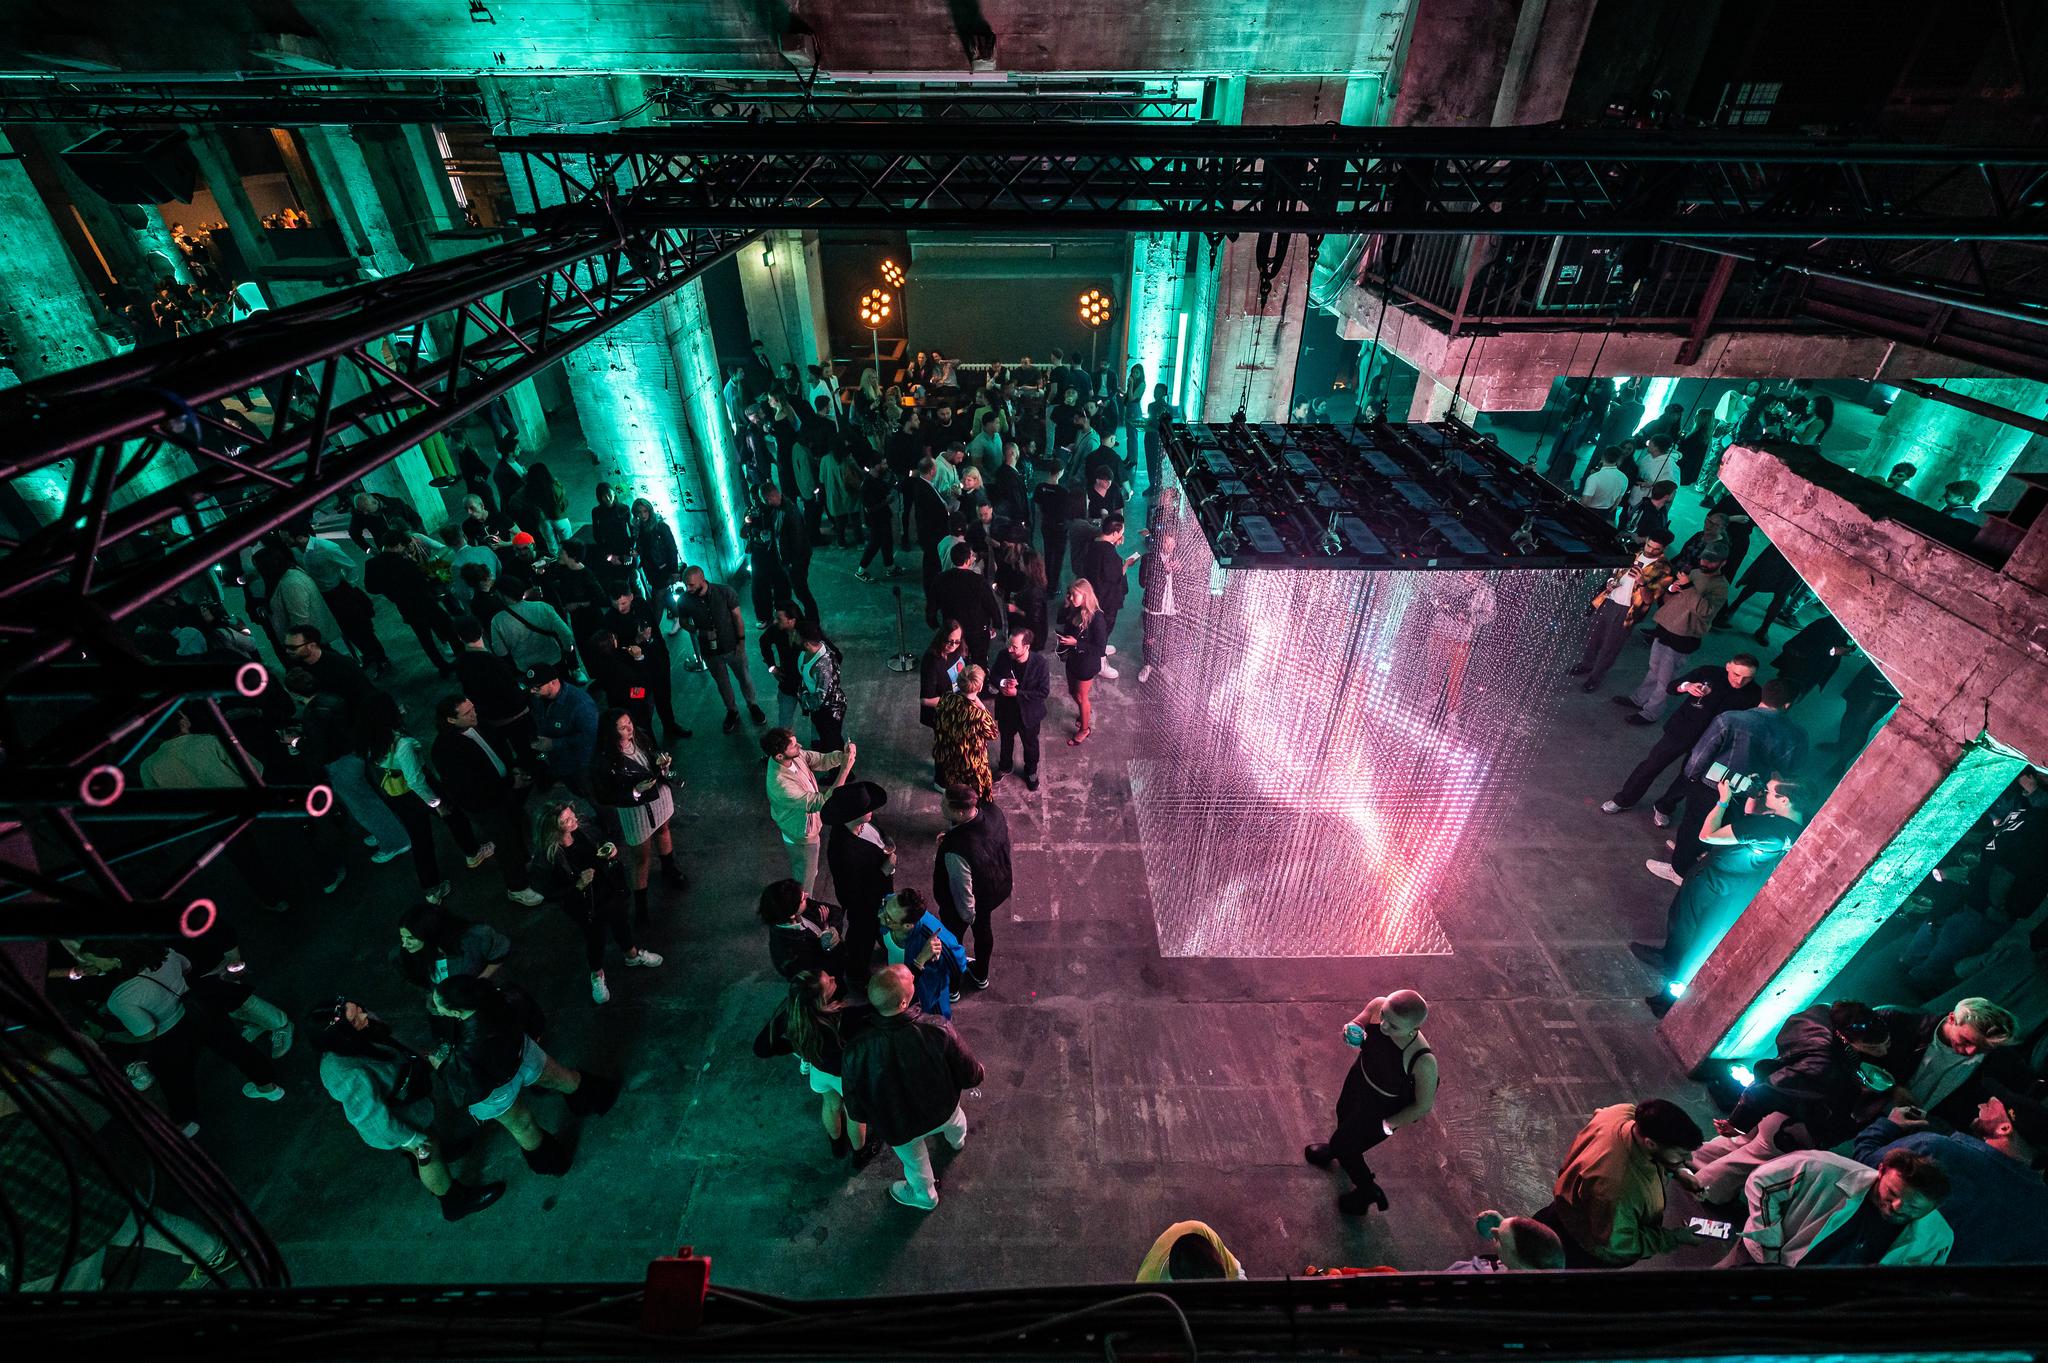 Top view of the people and immersive installations at Battle Royal Studios event for a fortune 500 client at Berlin's Kraftwerk